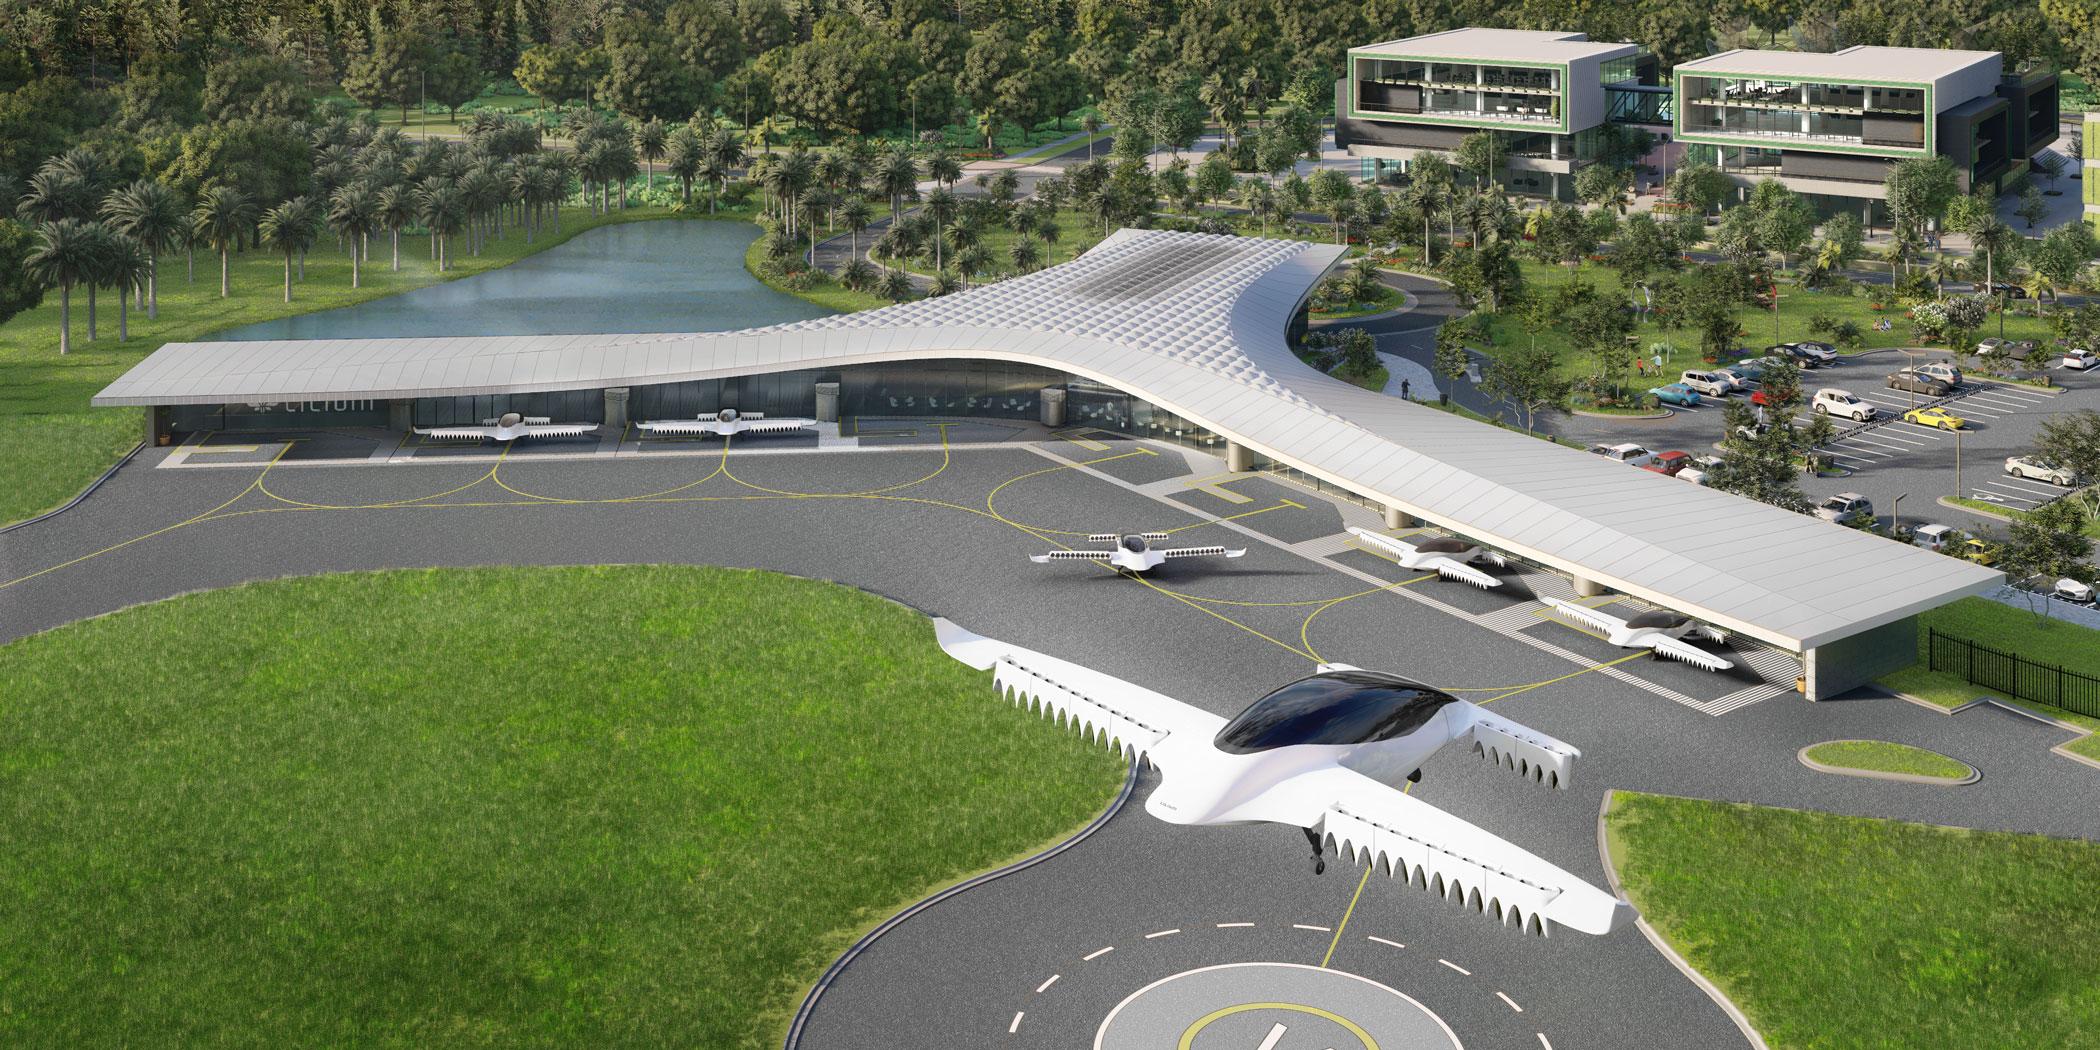 Lilium is planning to launch flights in Florida in 2024, with plans for bases in locations such as Orlando. It expects its Lilium Jet to have up to seven seats and be able to fly almost 190 miles.